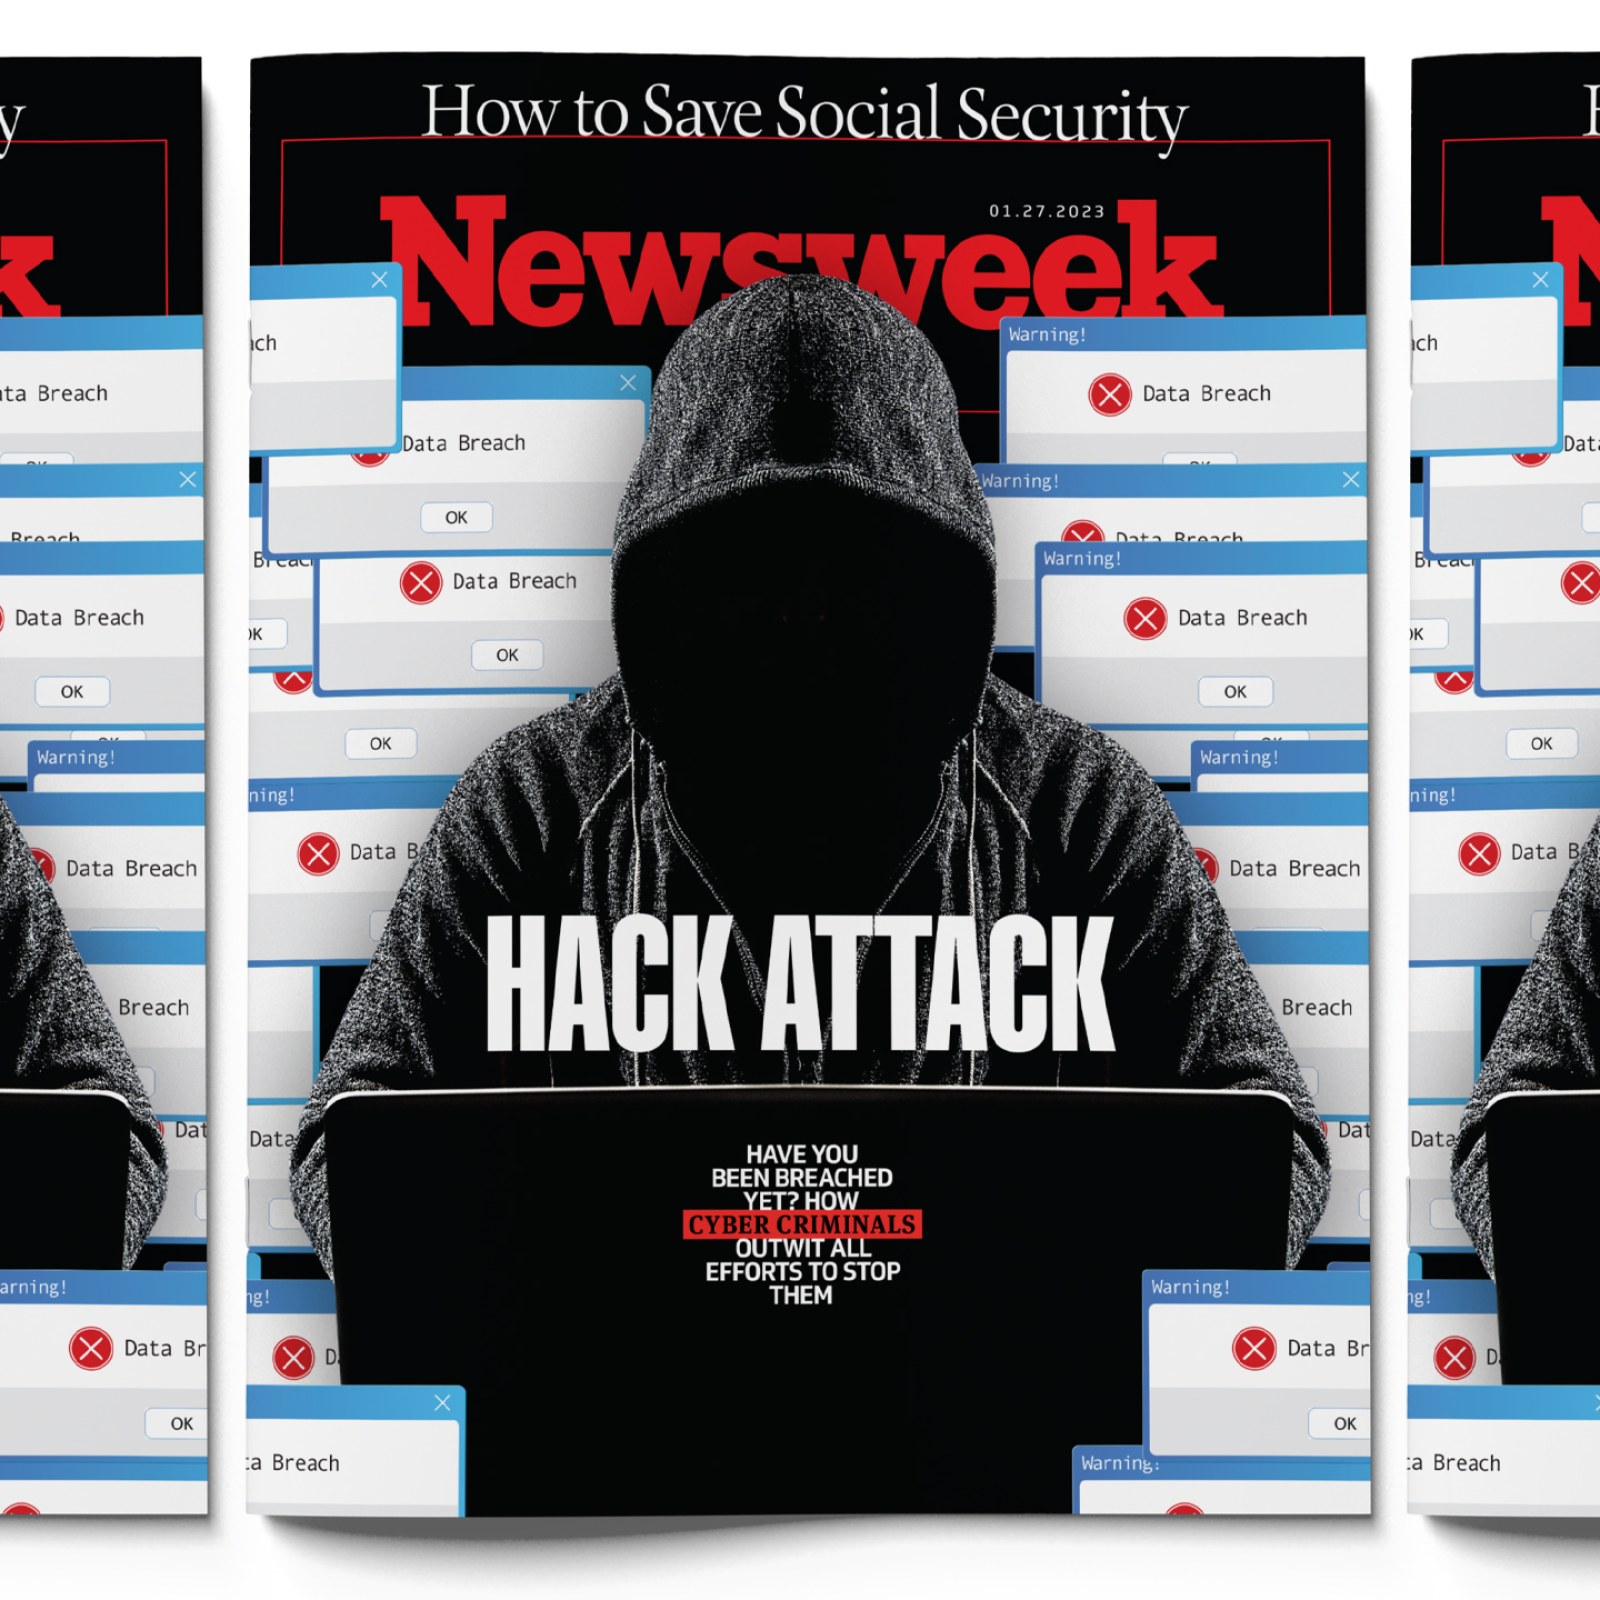 Hacked Accounts: What to Do Right Now - National Cybersecurity